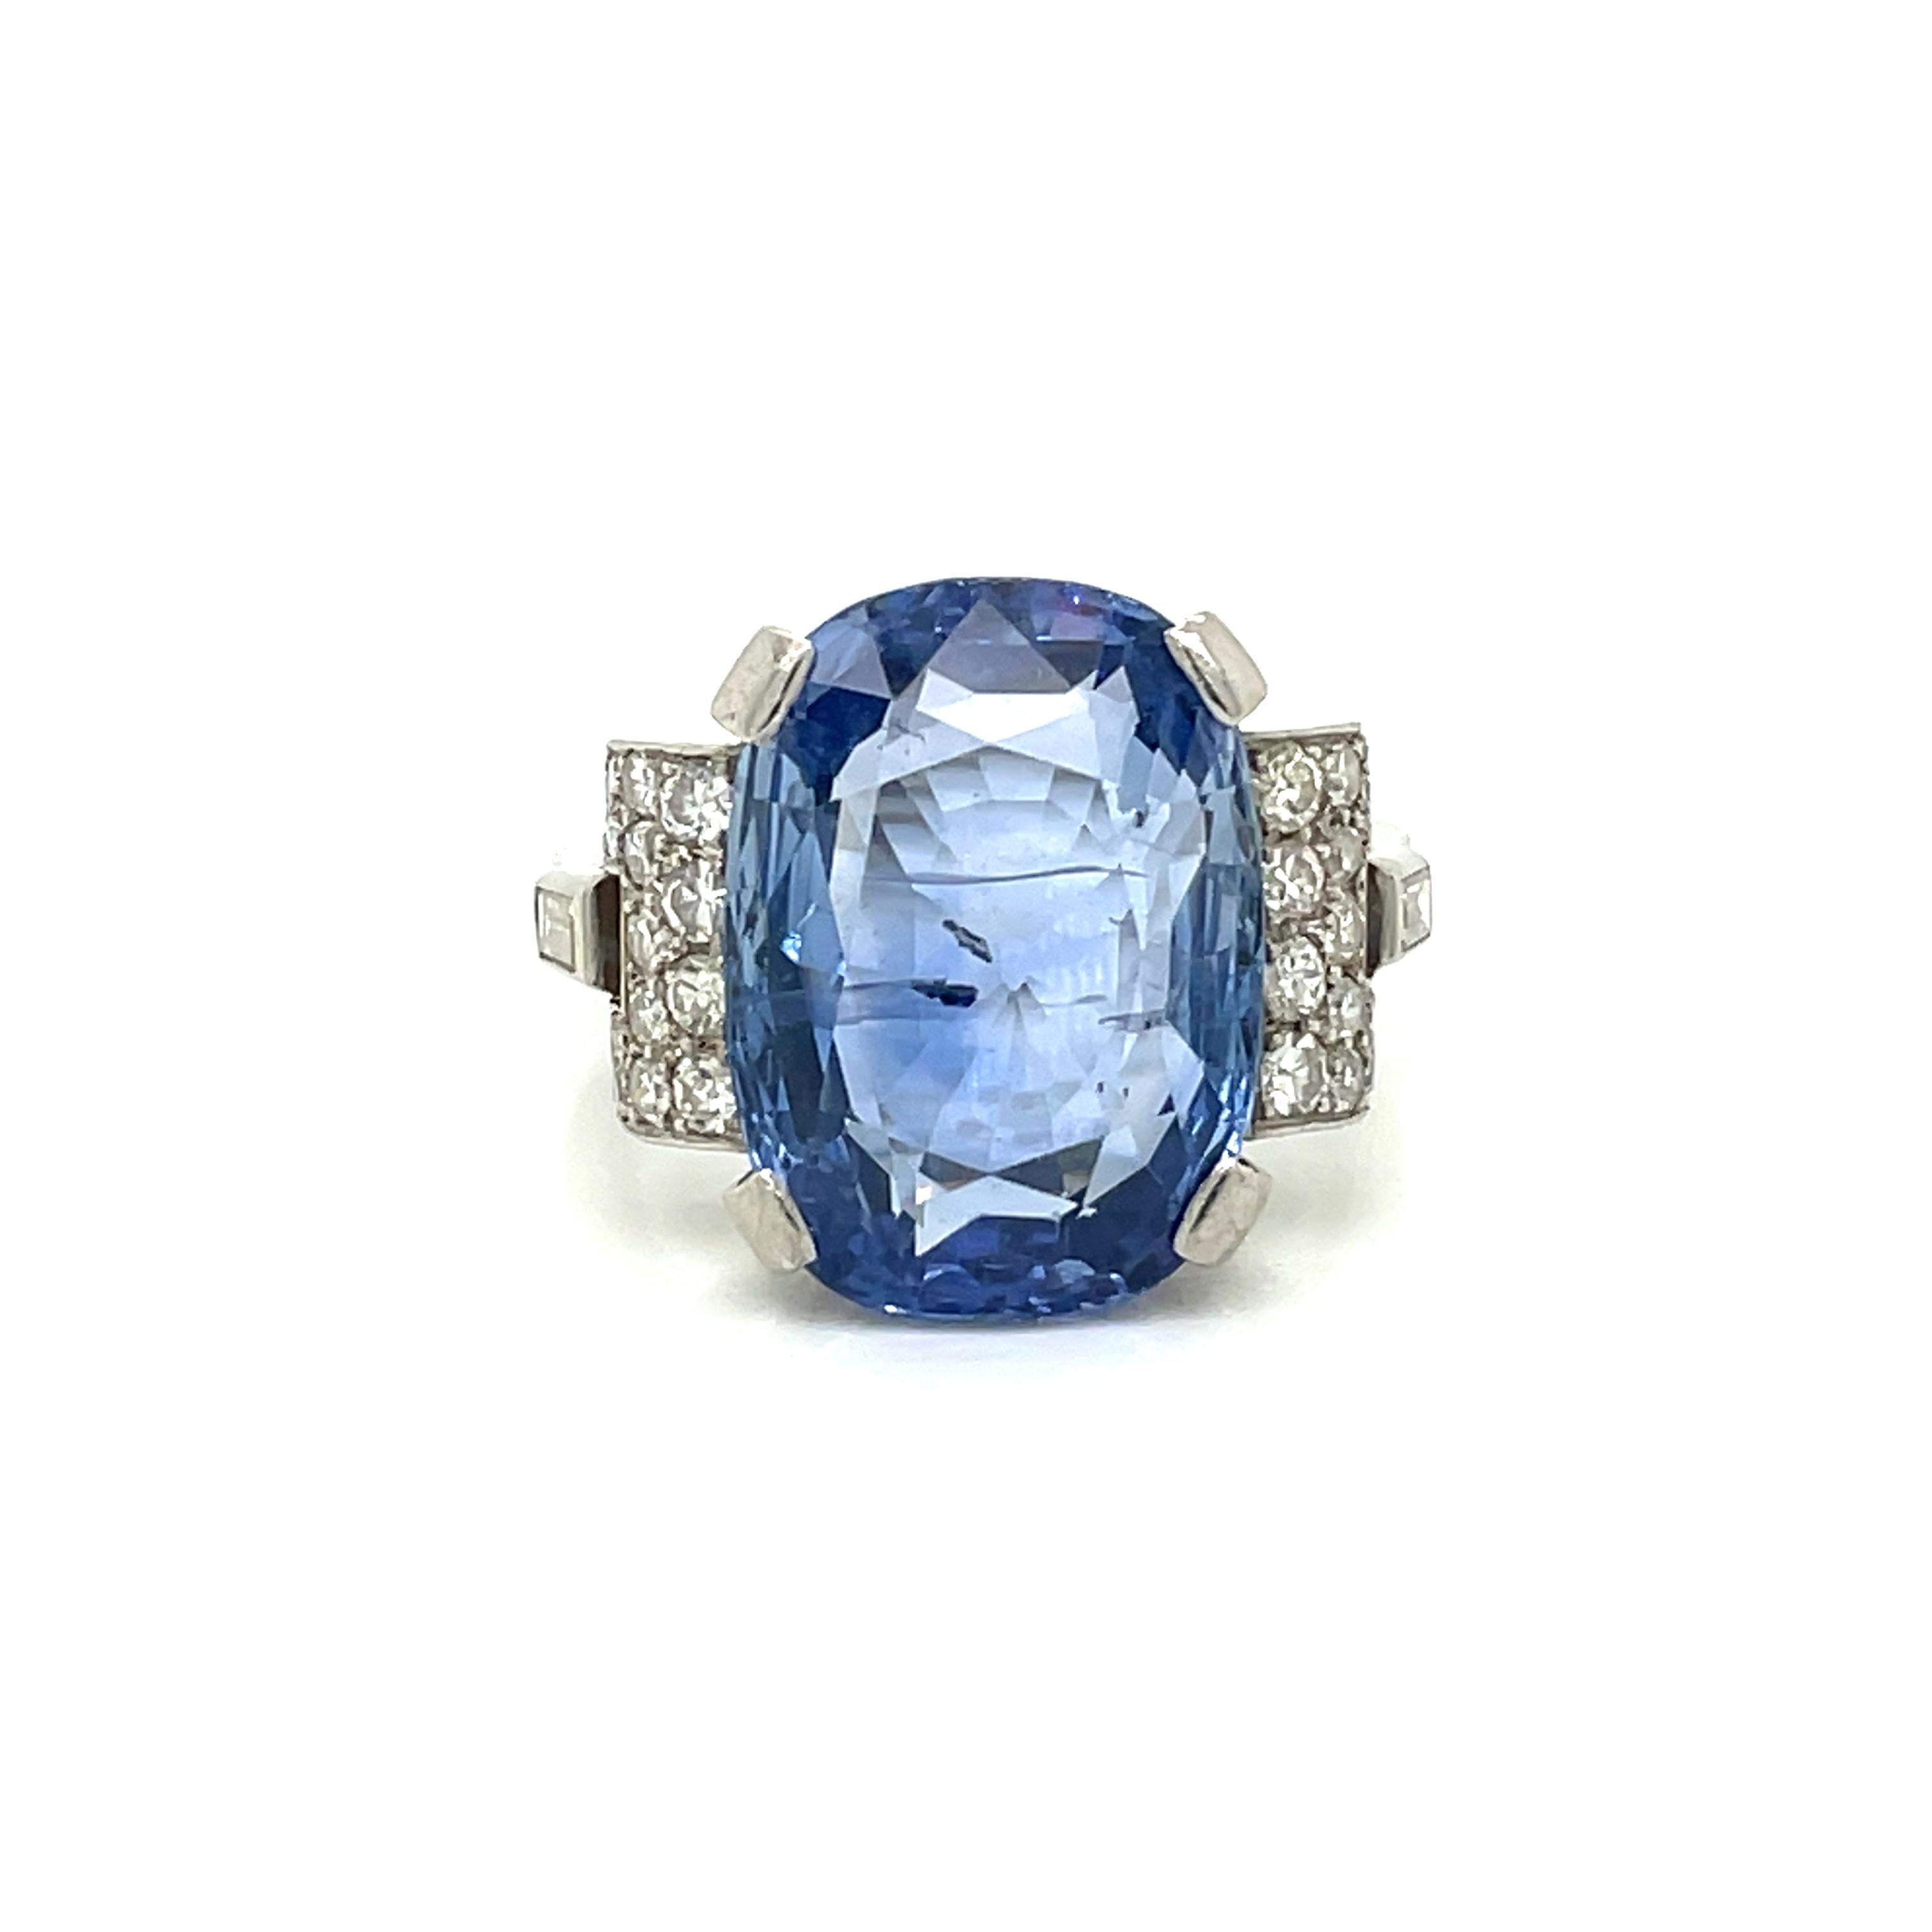 An exquisite genuine Art Deco ring handcrafted in Platinum by master jewelers, featuring an amazing rare vivid 15.50 carat Unheated untreated Natural Ceylon Sapphire cushion-shape, surrounded by 1.00 carats of old cut diamonds.

The Sapphire is